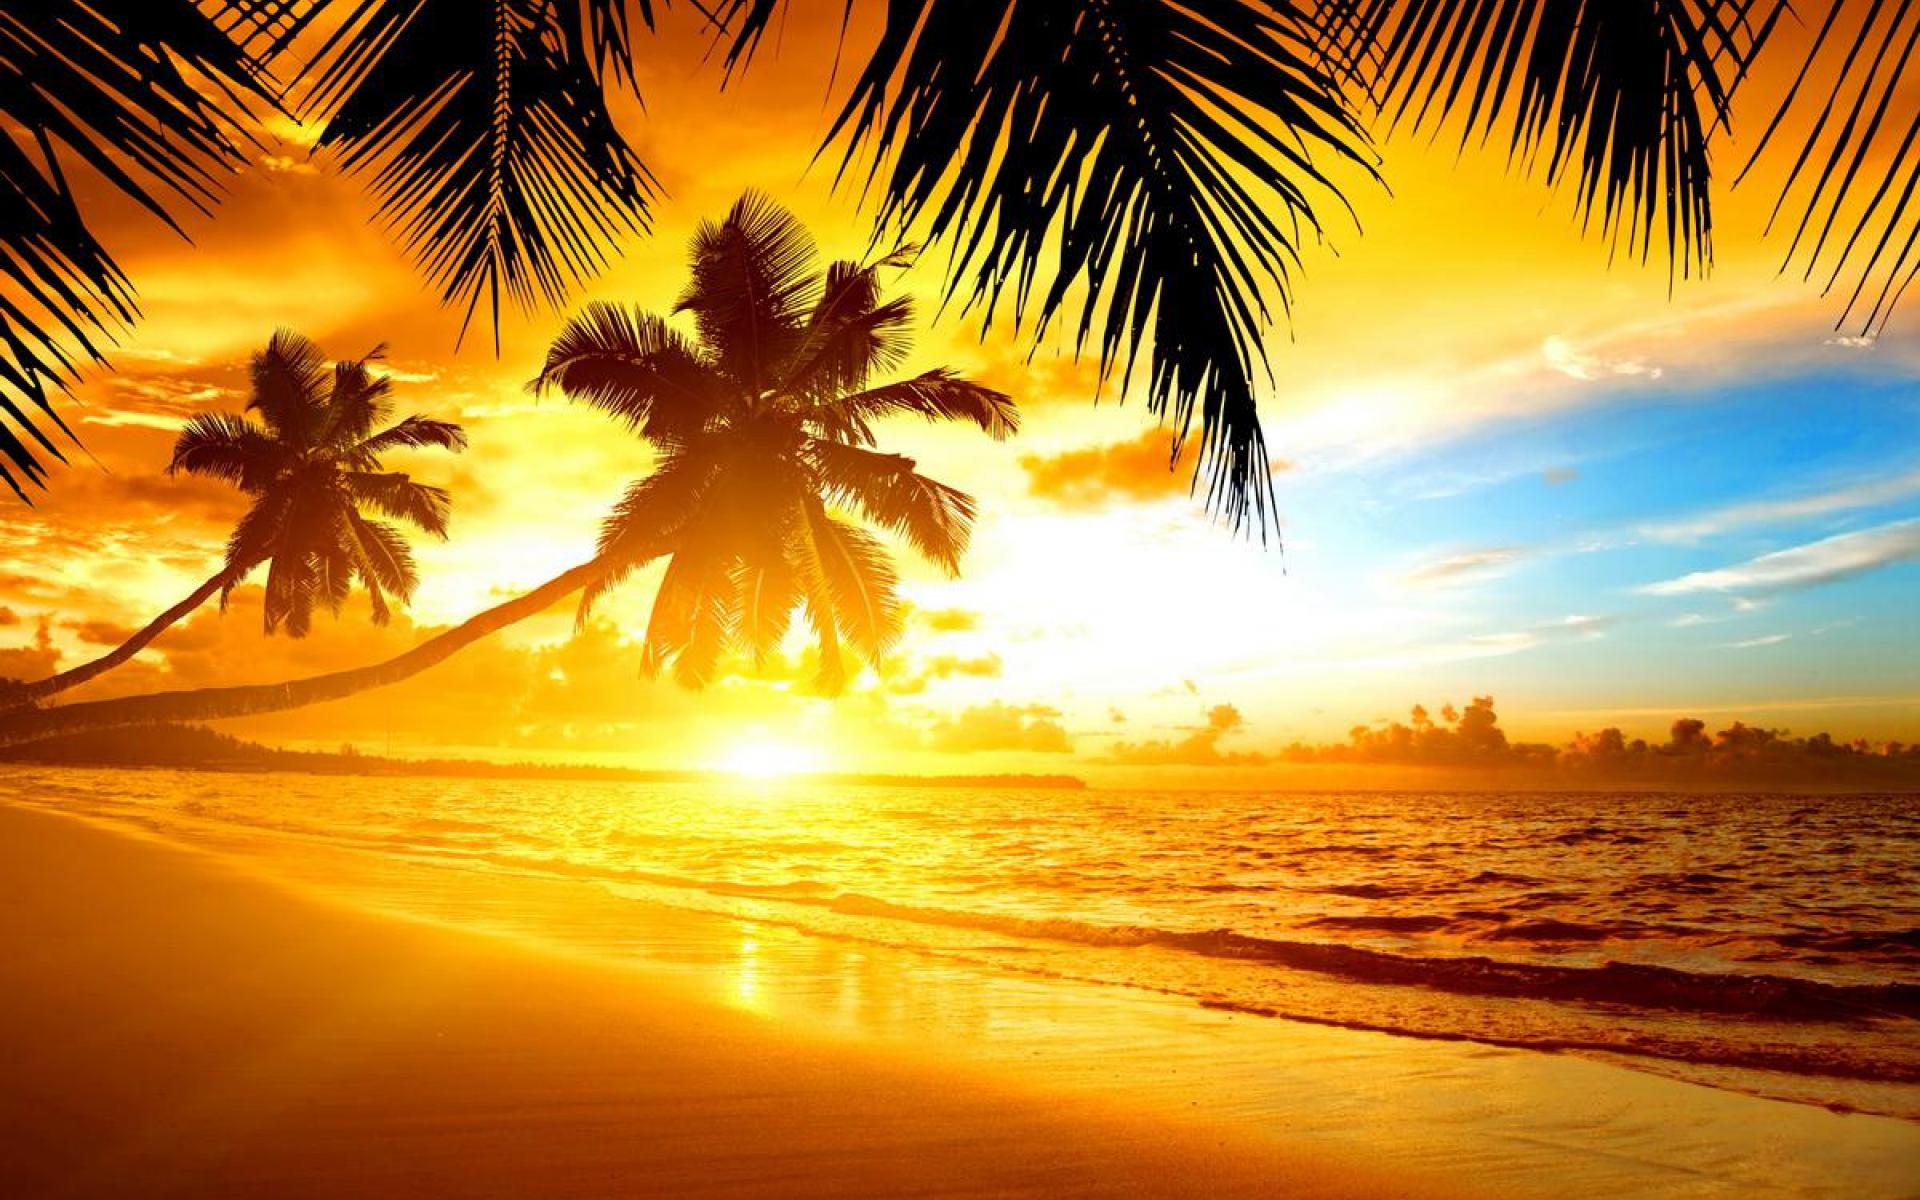 Related wallpapers from Tropical Island Beach Sunset